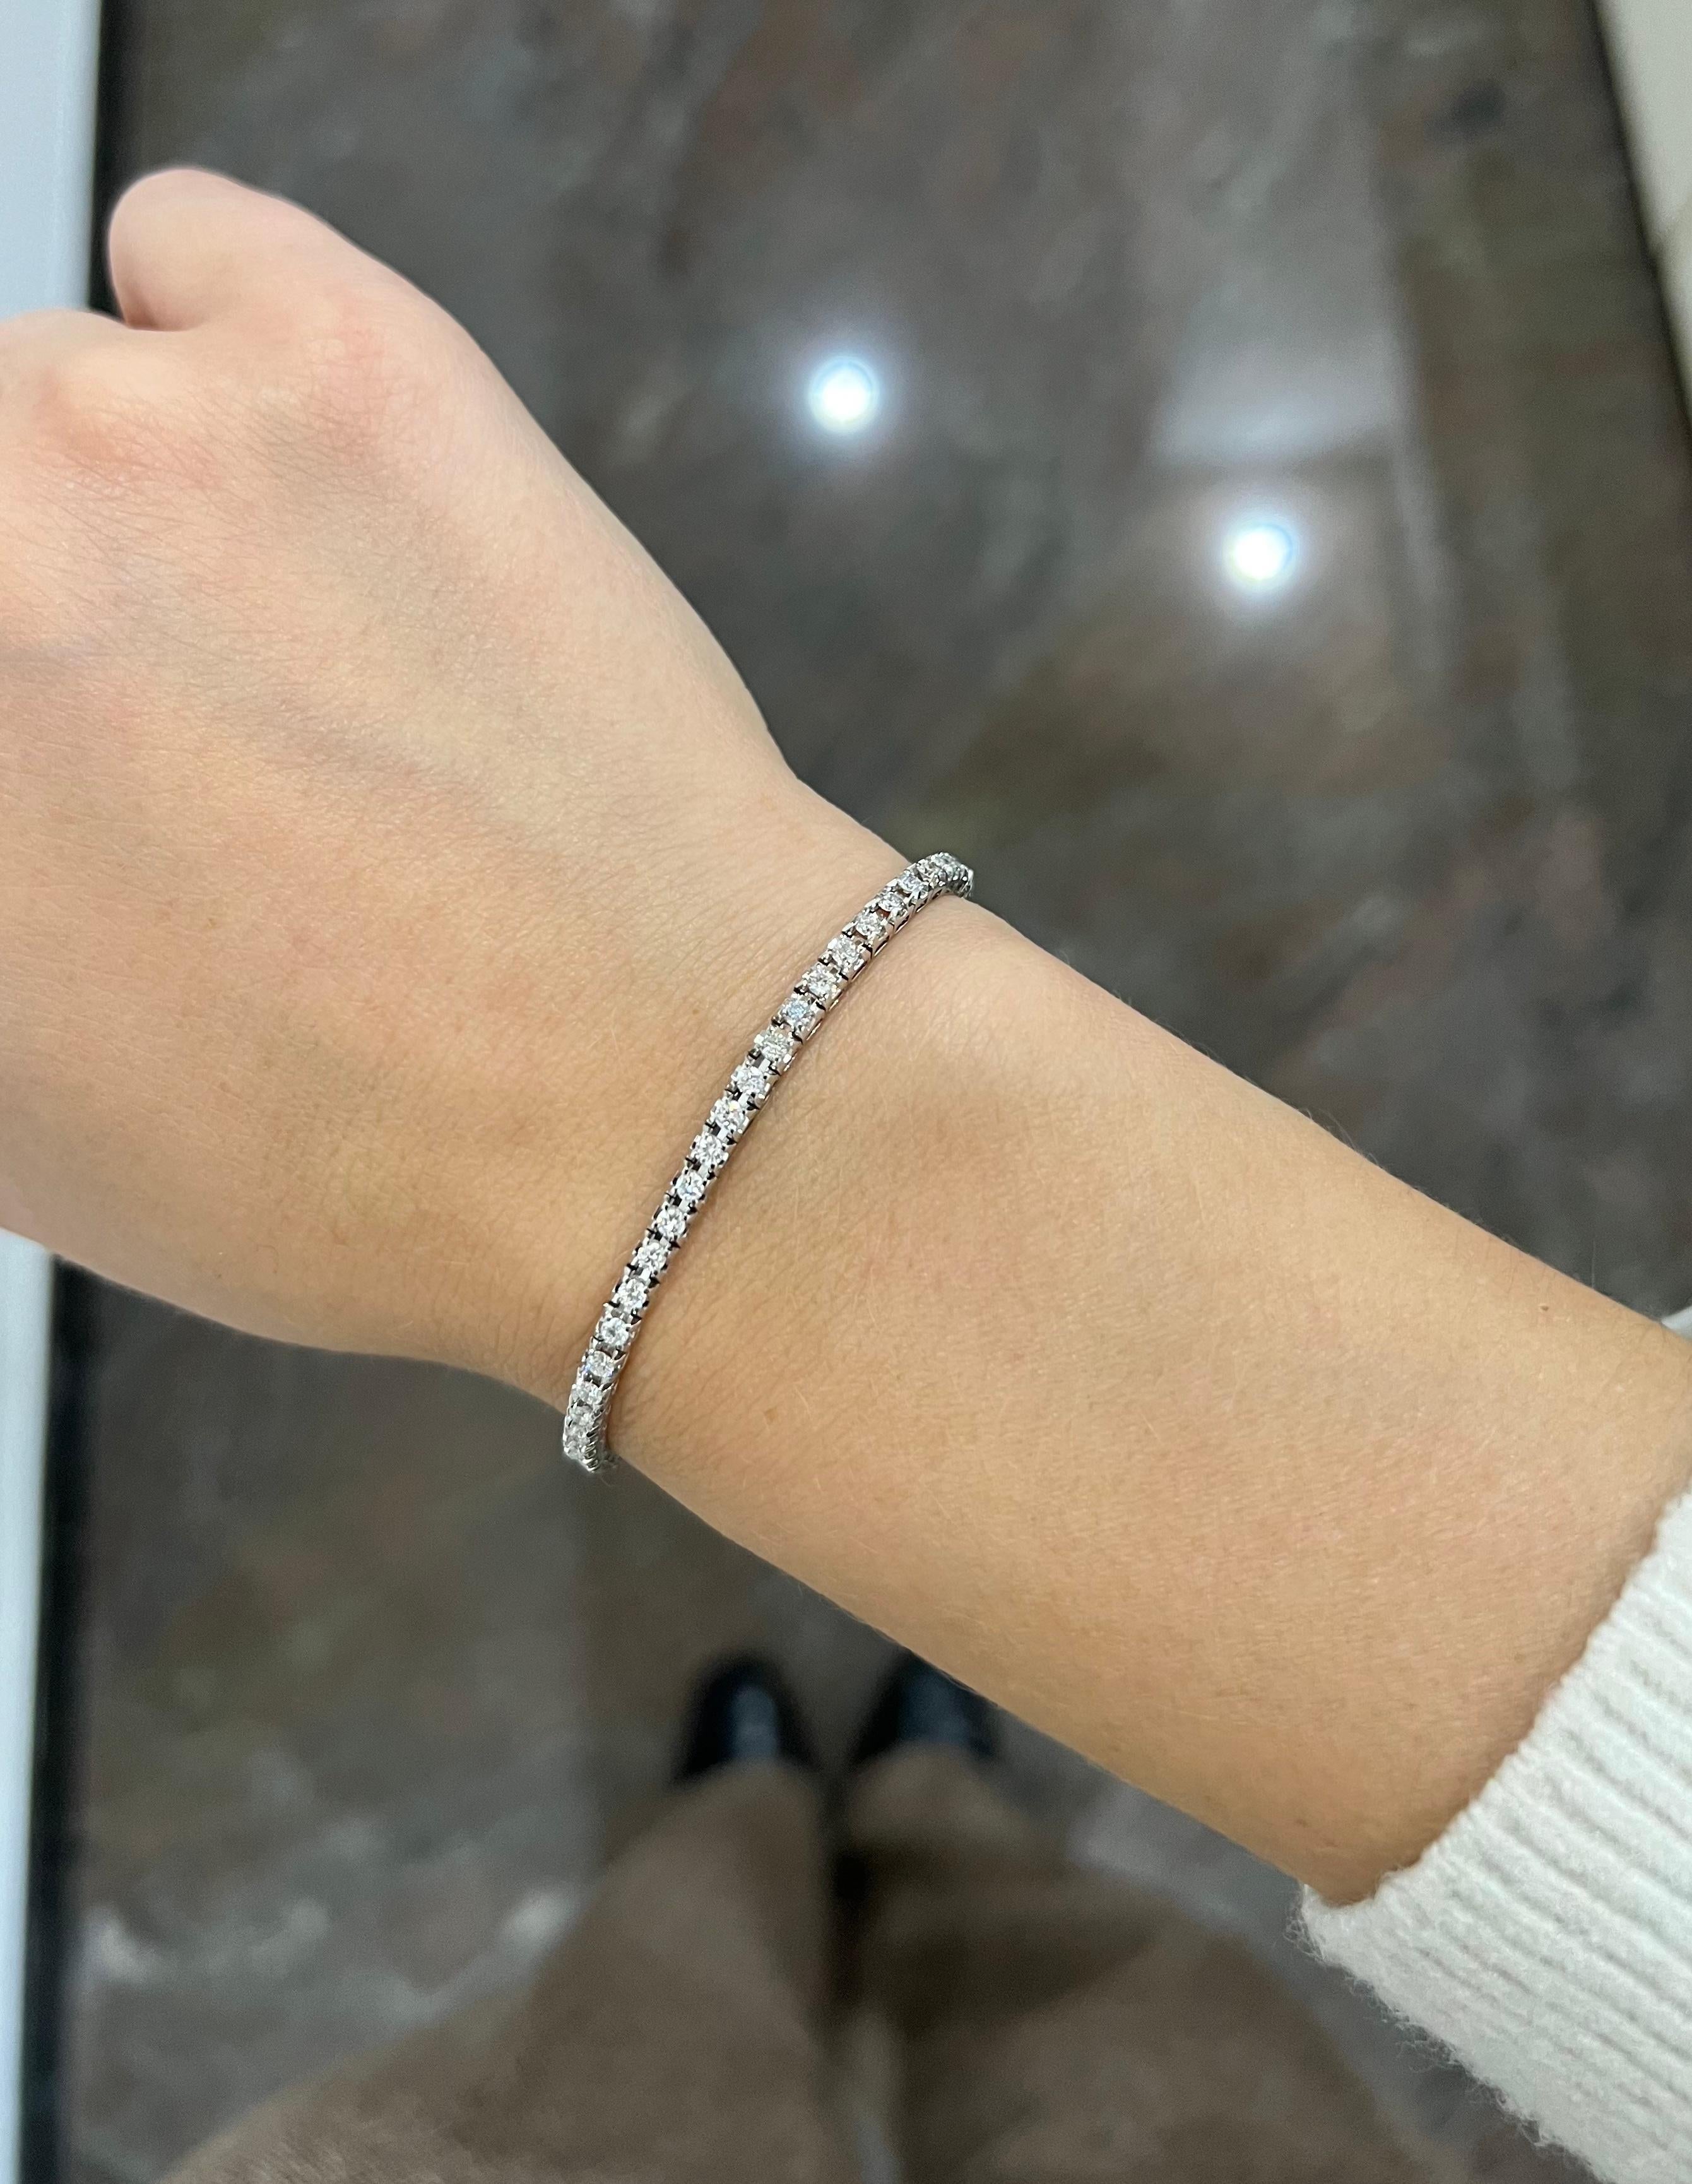 Elevate your style with this exquisite 18K White Gold Four Prong Tennis Bracelet. Crafted with meticulous attention to detail, it features a continuous line of dazzling round-cut natural diamonds, totaling 4.00 carats. 

Each diamond is expertly